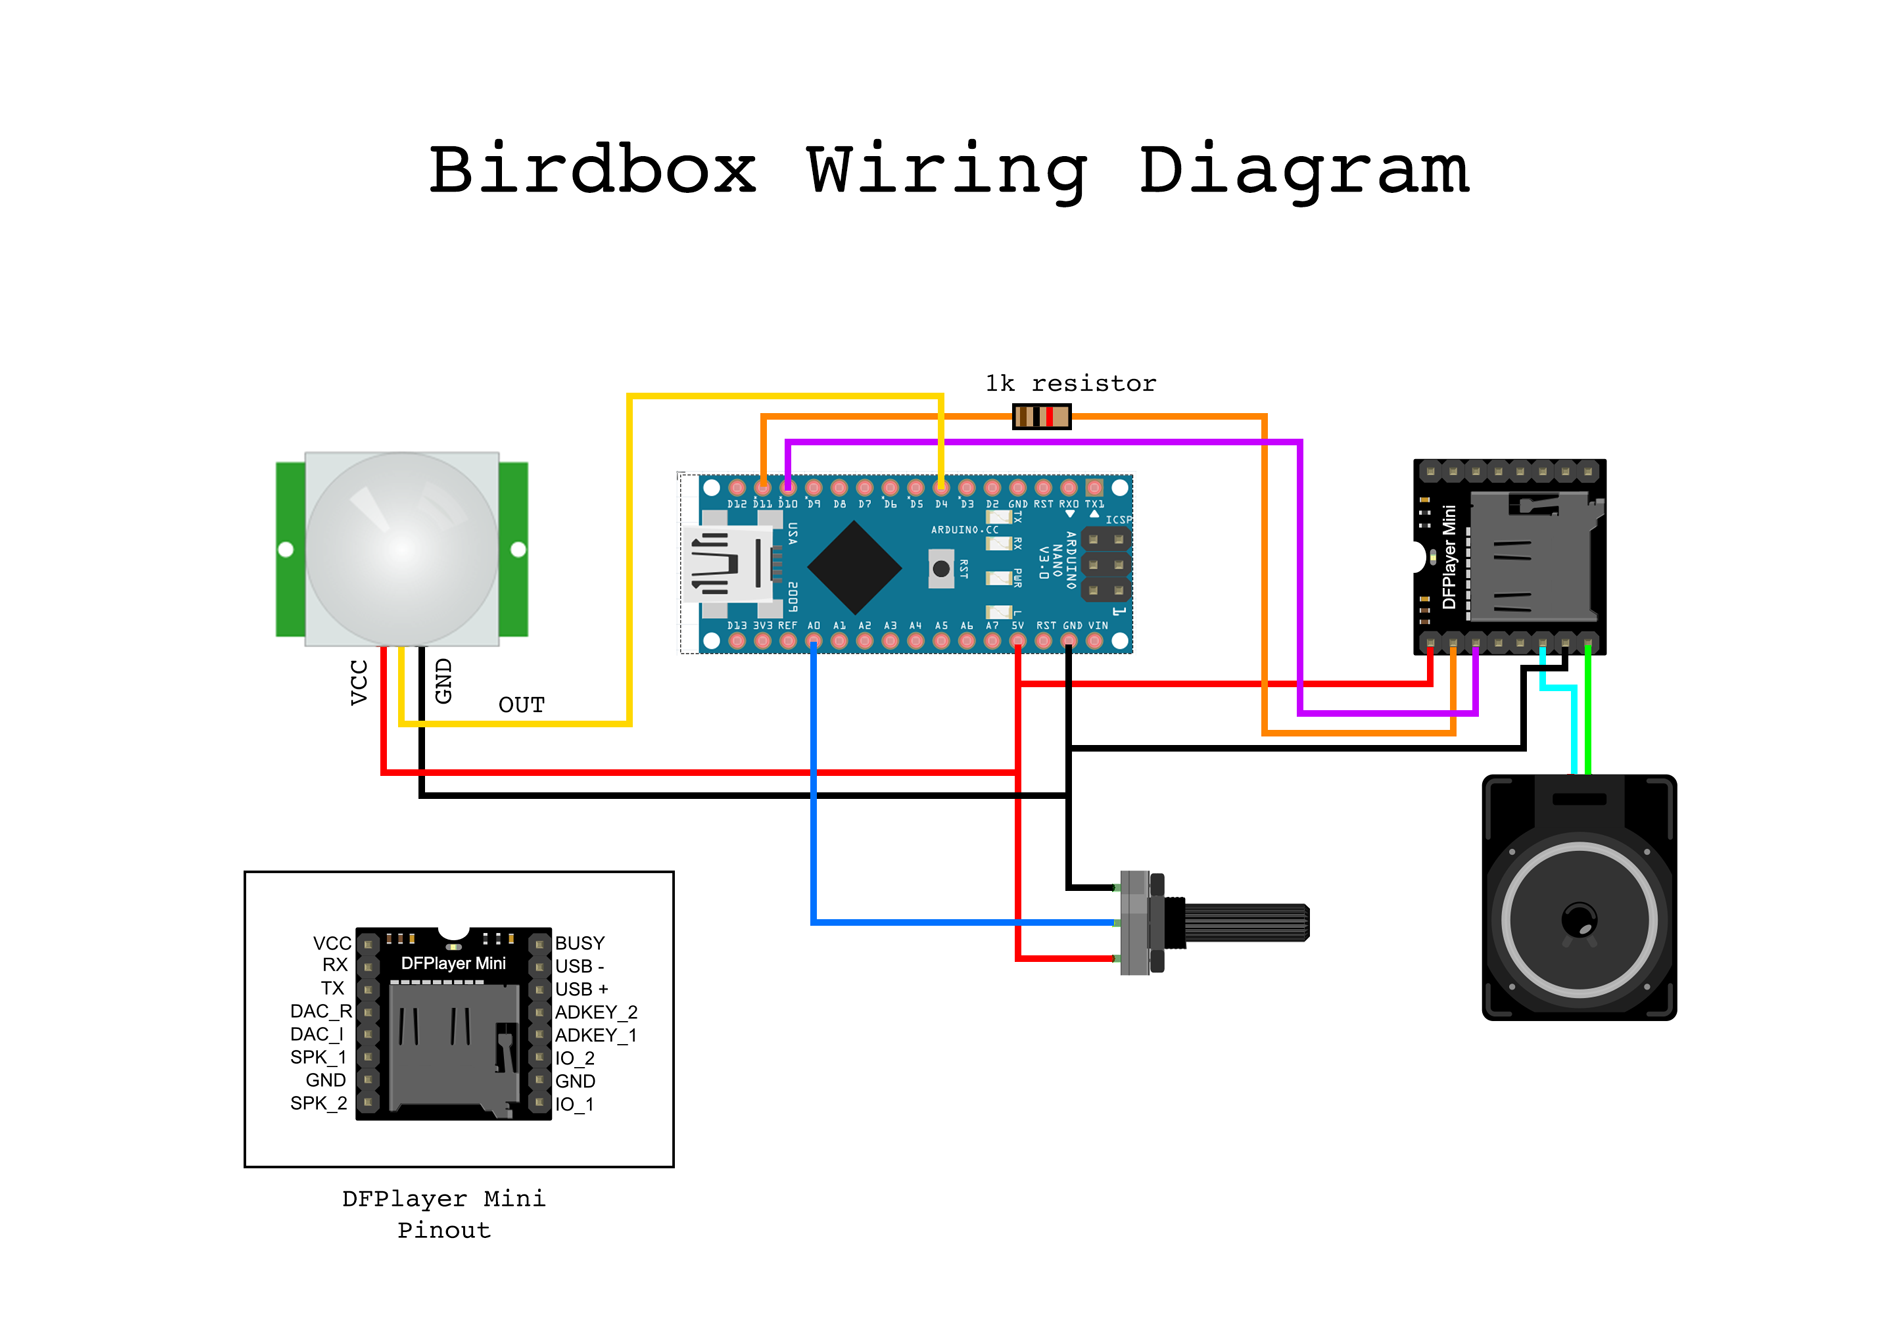 A wiring diagram showing how the components of the Birdbox are connected together.